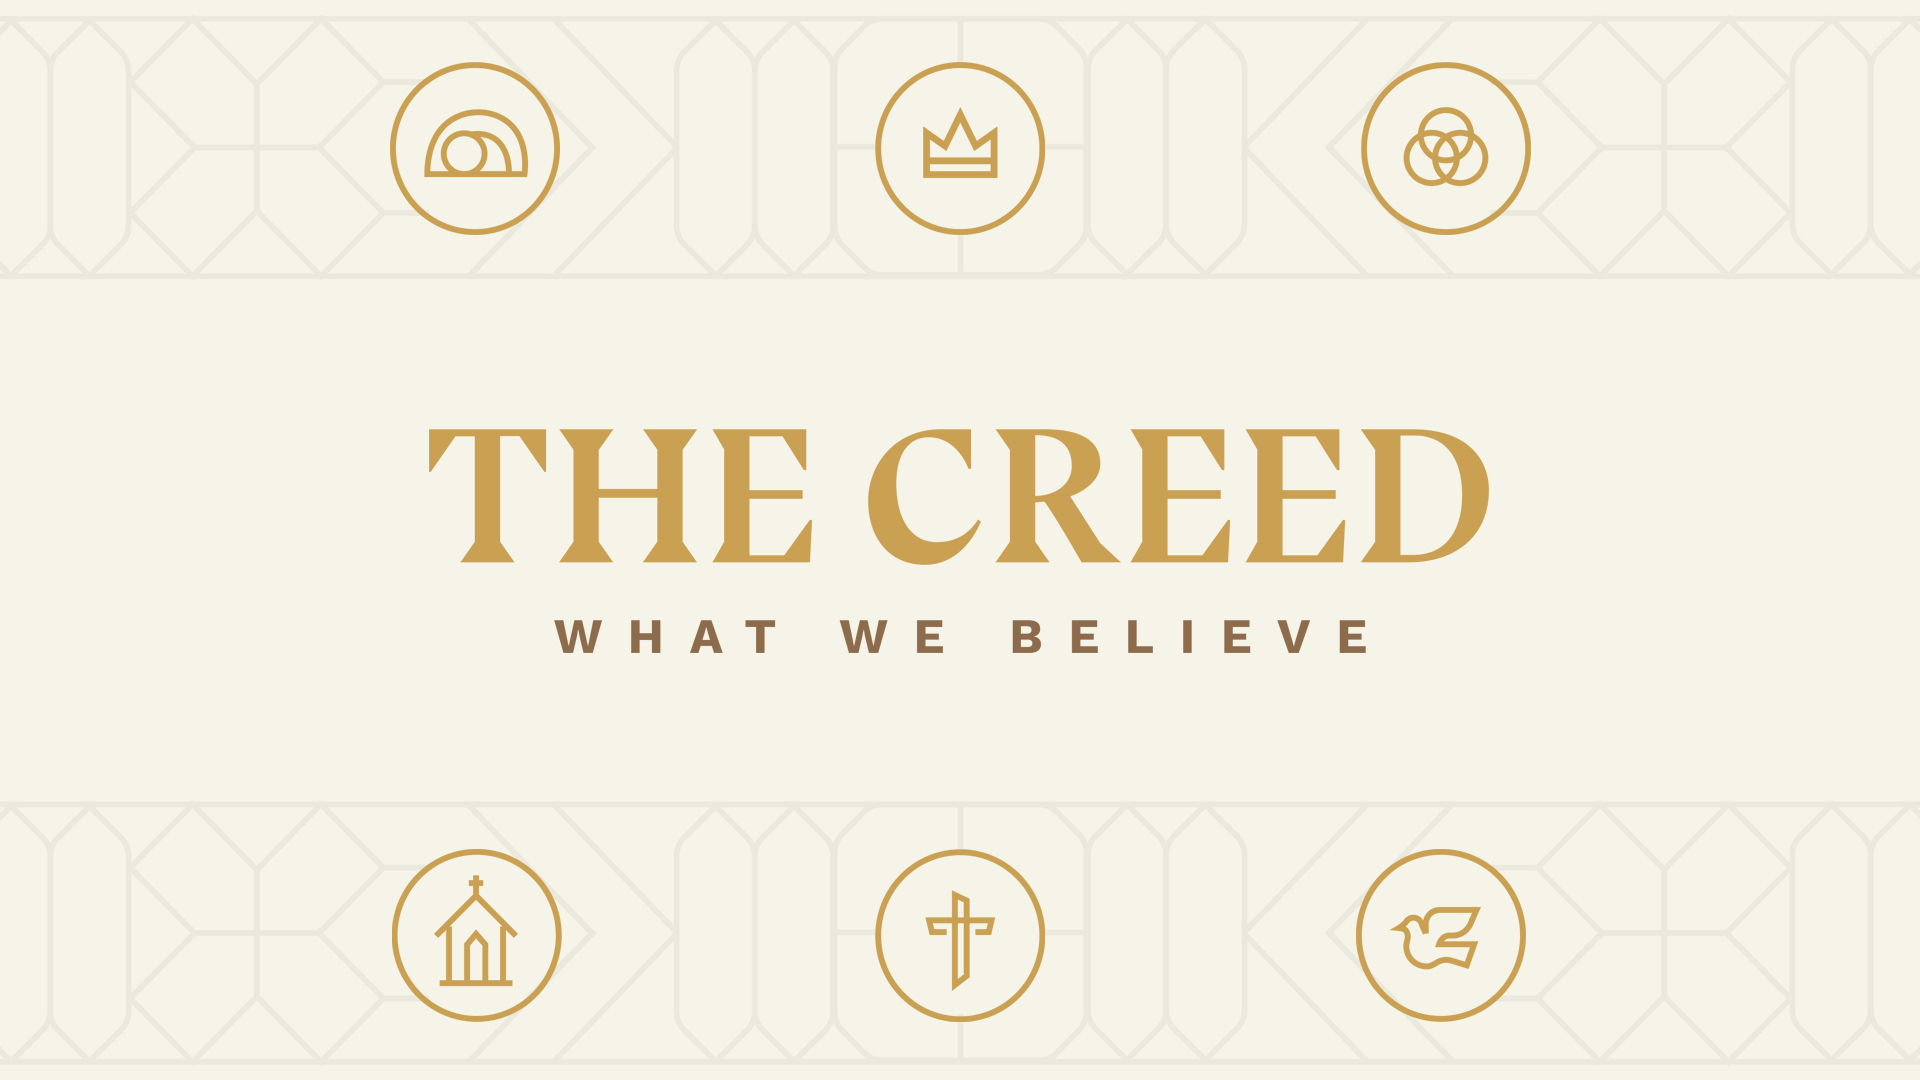 The Creed Comes from the Bible